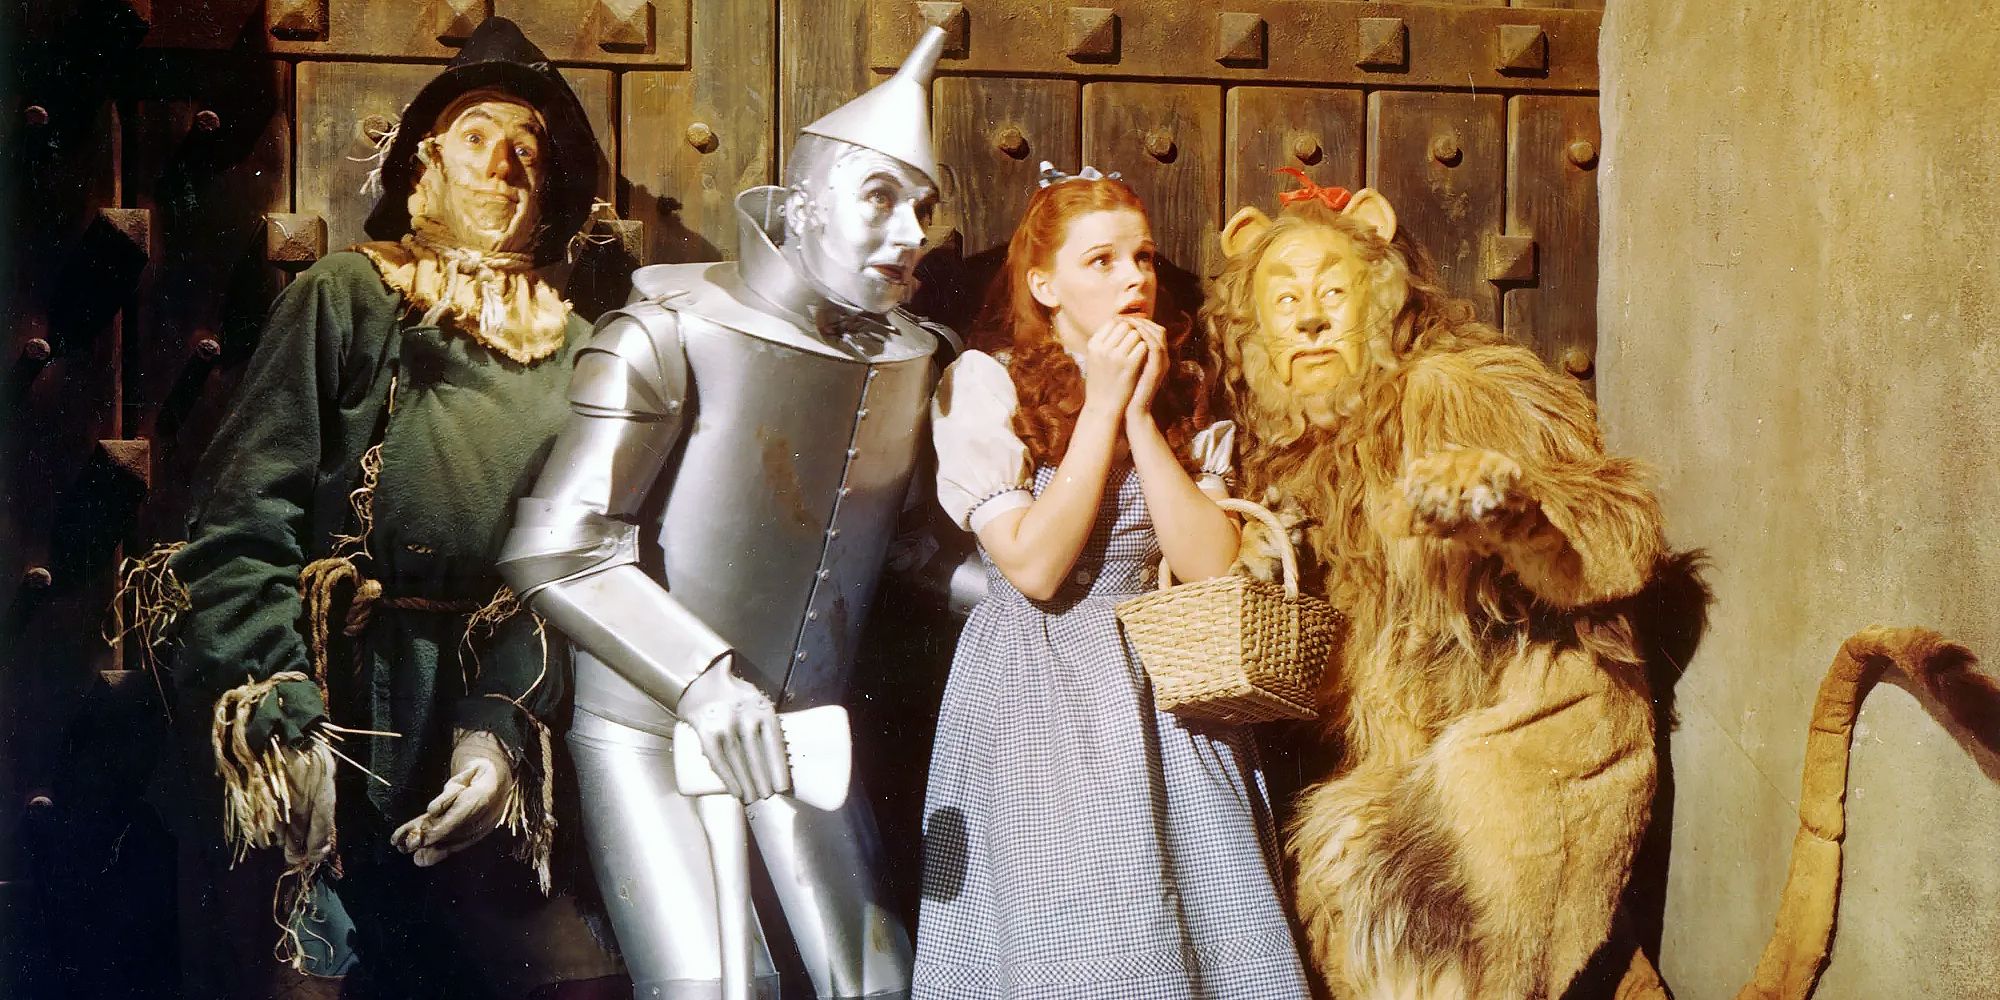 'The Wizard of Oz' was originally set in the real world before studio execs decided it would play better if Oz appeared in dream sequence